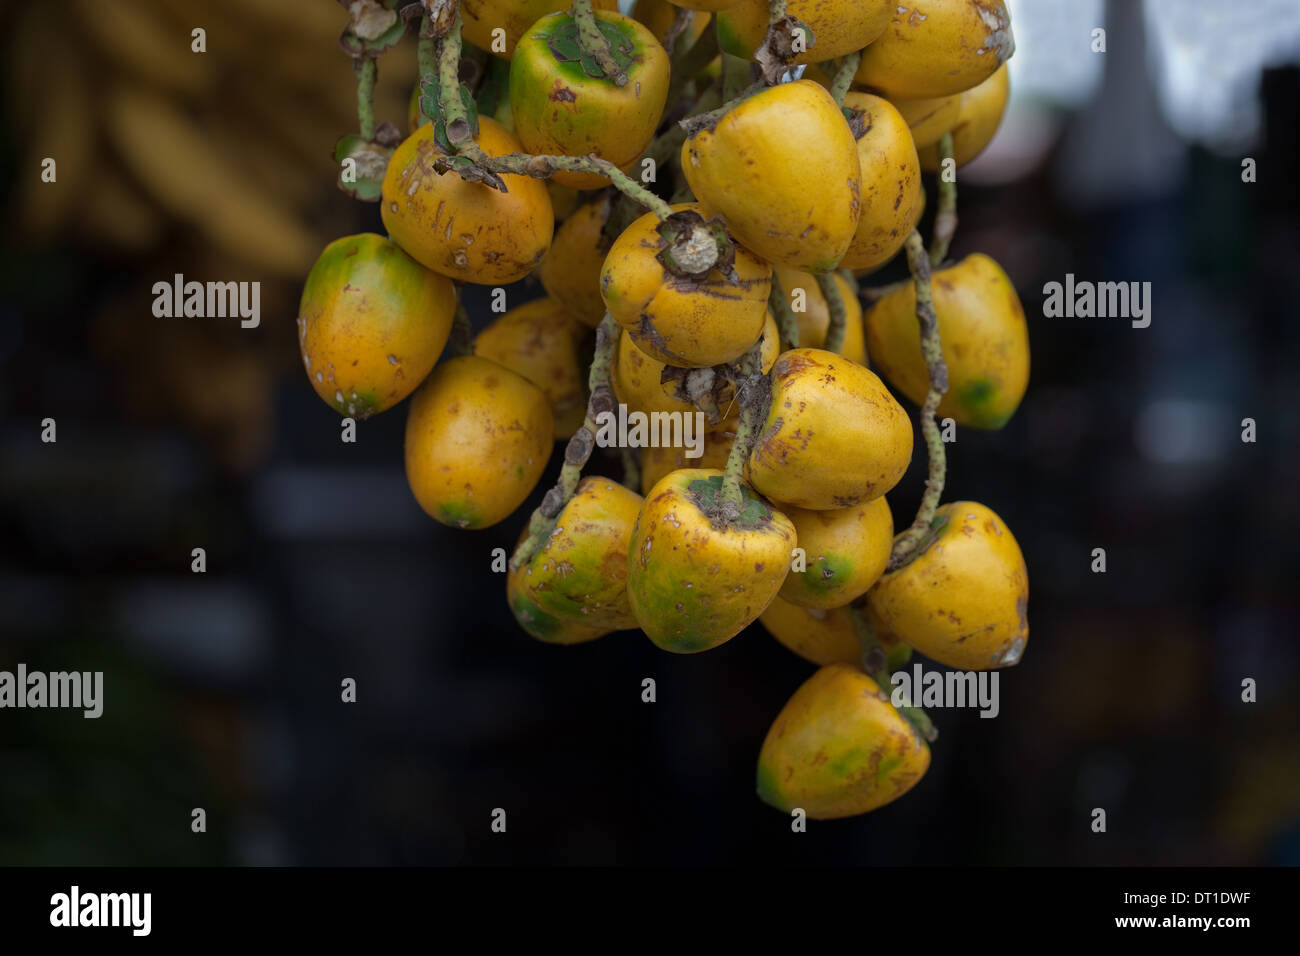 Oil Palm (Elaeis guineensis), tree fruits or 'nuts'. Roadside market stall. Costa Rica. Stock Photo